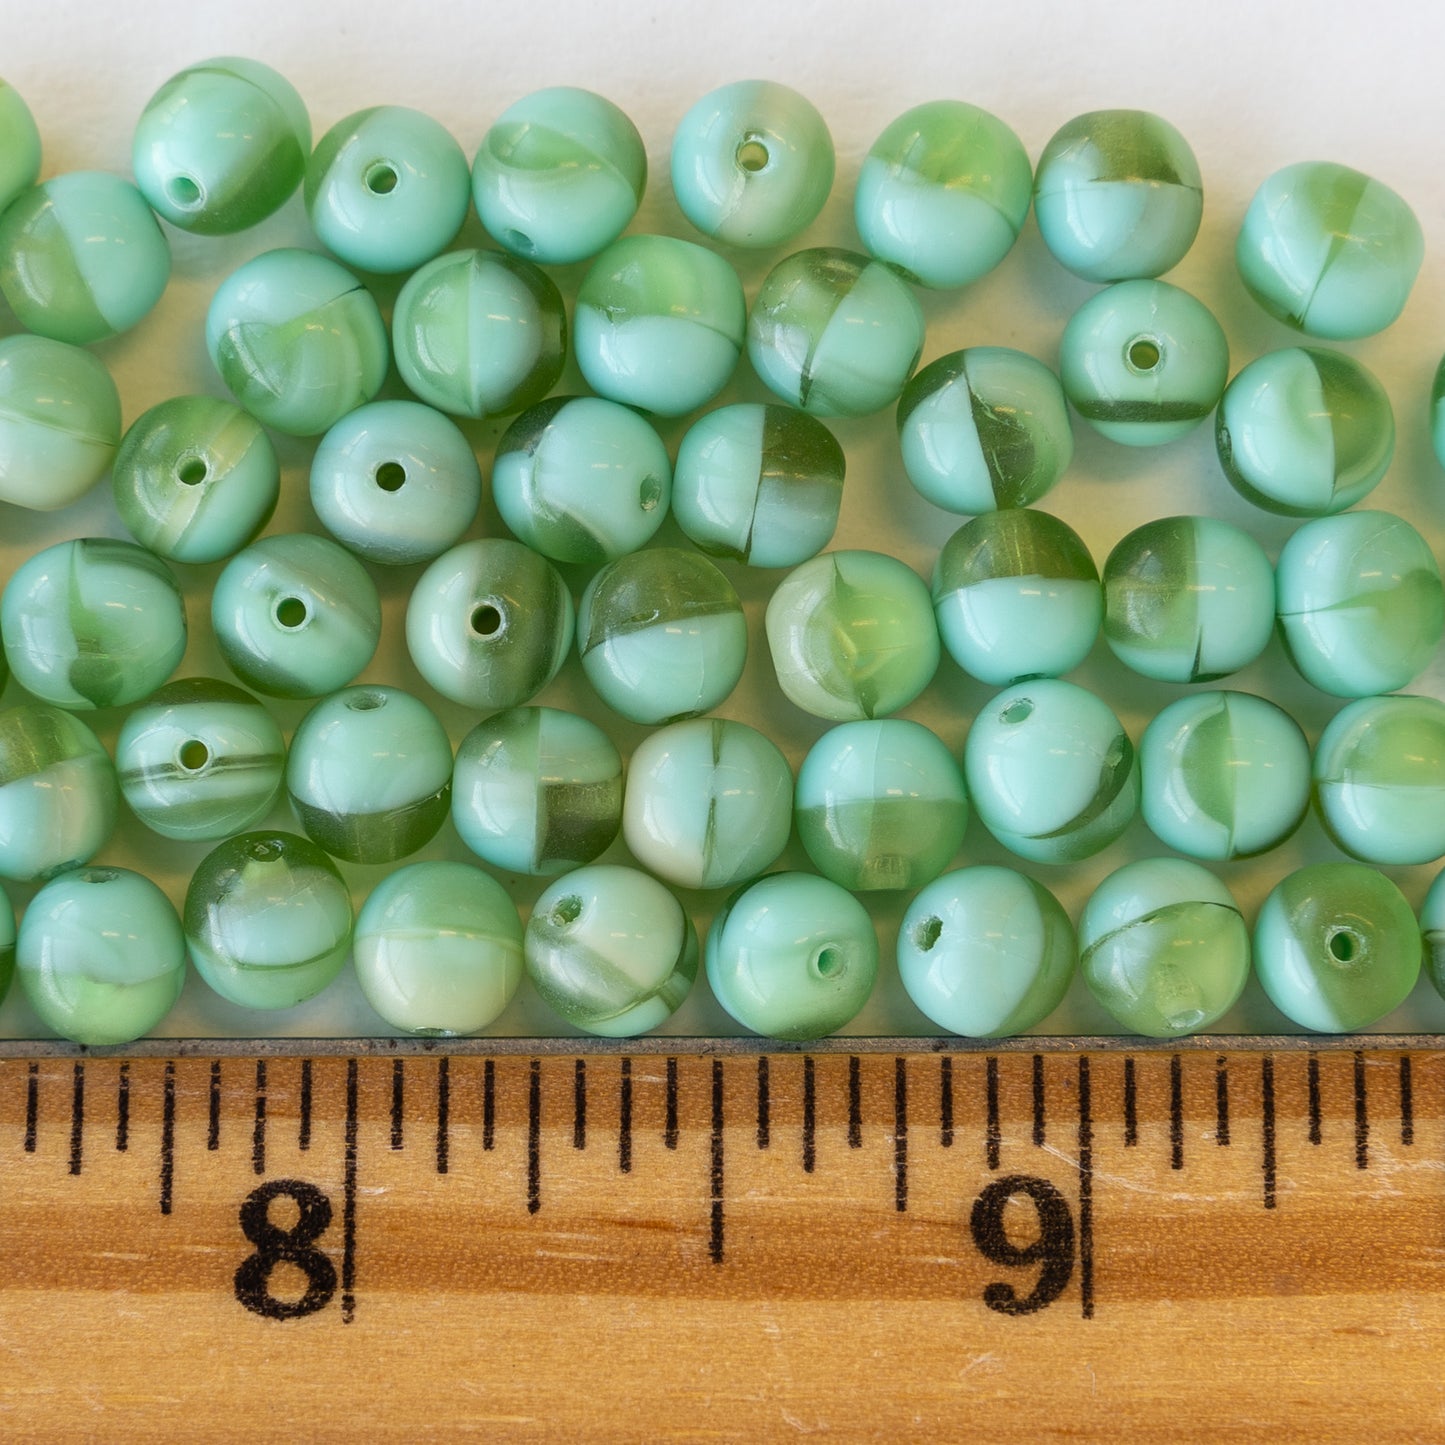 6mm Round Glass Beads - Seafoam Lime and Ivory Mix - 120 Beads